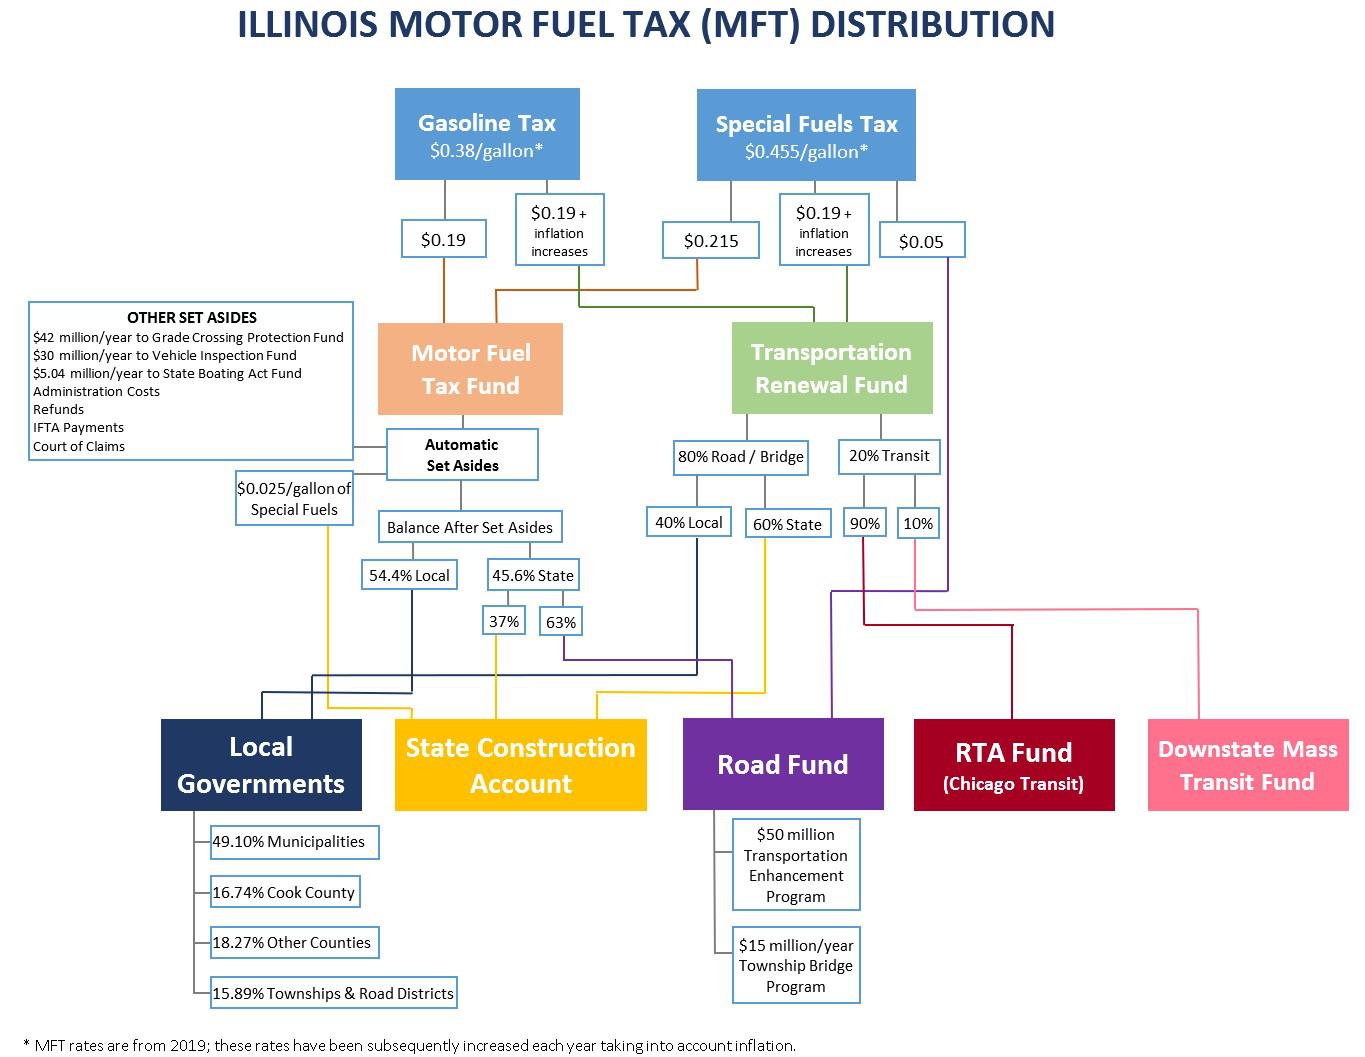 Roadmap of Gasoline and Special Fuels Taxes